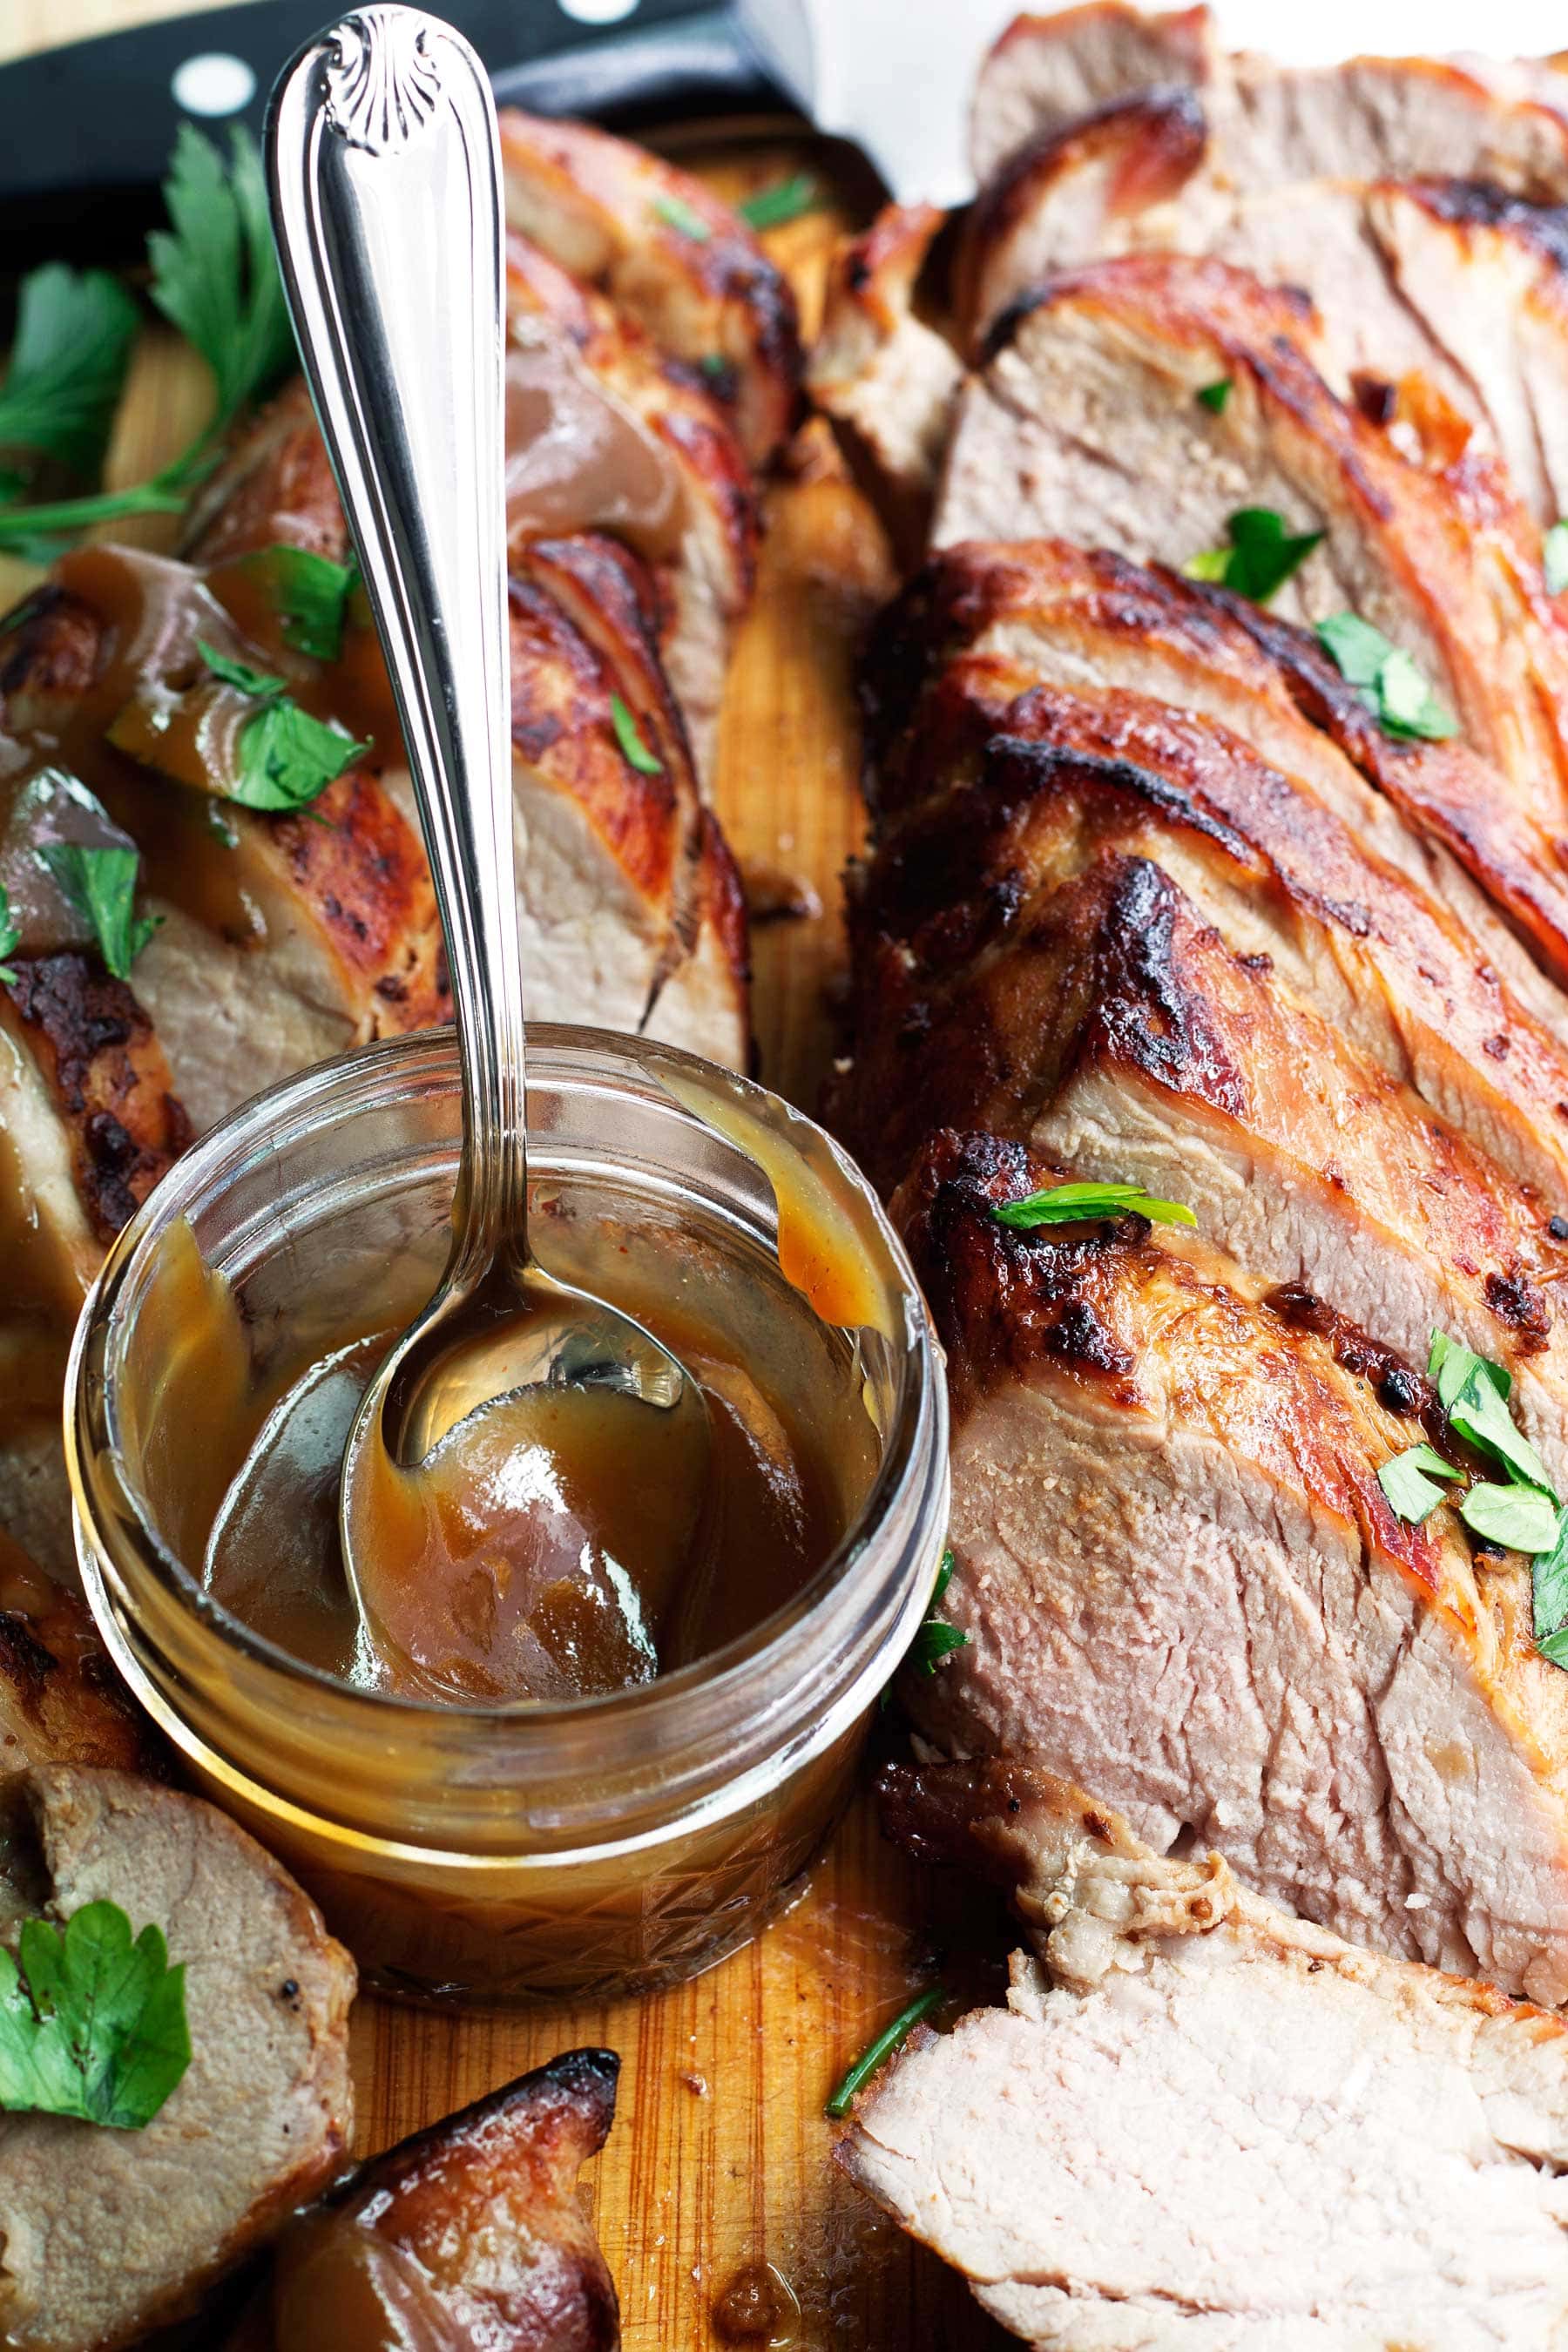 Easy to make and only 5 ingredients! This Maple Bourbon Pork Tenderloin recipe is a perfect easy paleo dinner recipe for any night of the week. This recipe is also gluten free, dairy free, and can be made low carb and keto! Keto pork tenderloin. Easy pork tenderloin. Paleo pork tenderloin. Low carb dinner. #maplesyrup #paleodinner #ketodinner #lowcarbdinner #porktenderloin #monkfruit #lakanto #paleo #keto #lowcarb #glutenfreedinner #healthydinner